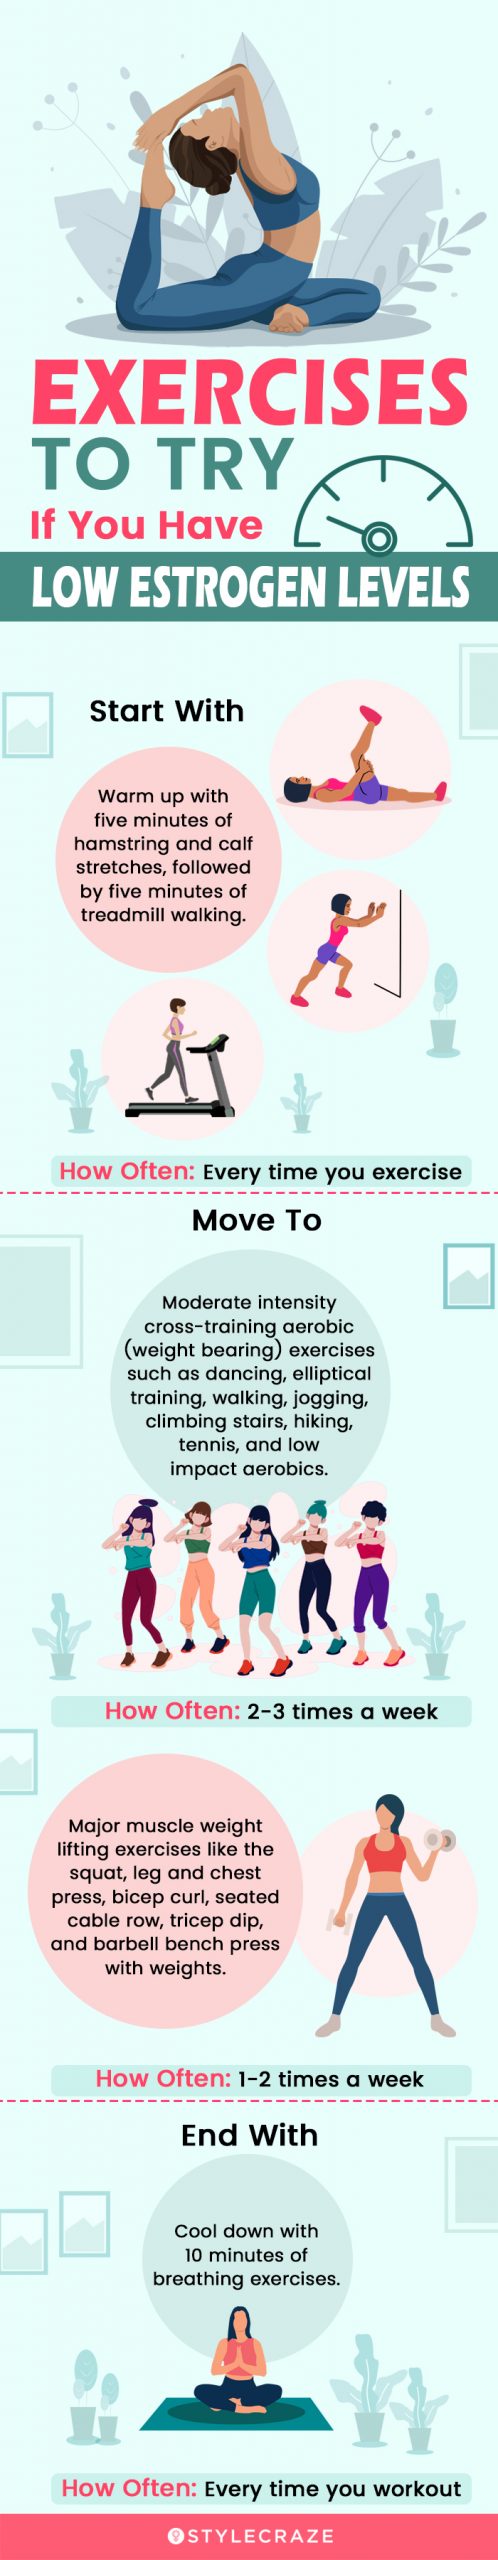 exercises to try if you have low estrogen levels (infographic)